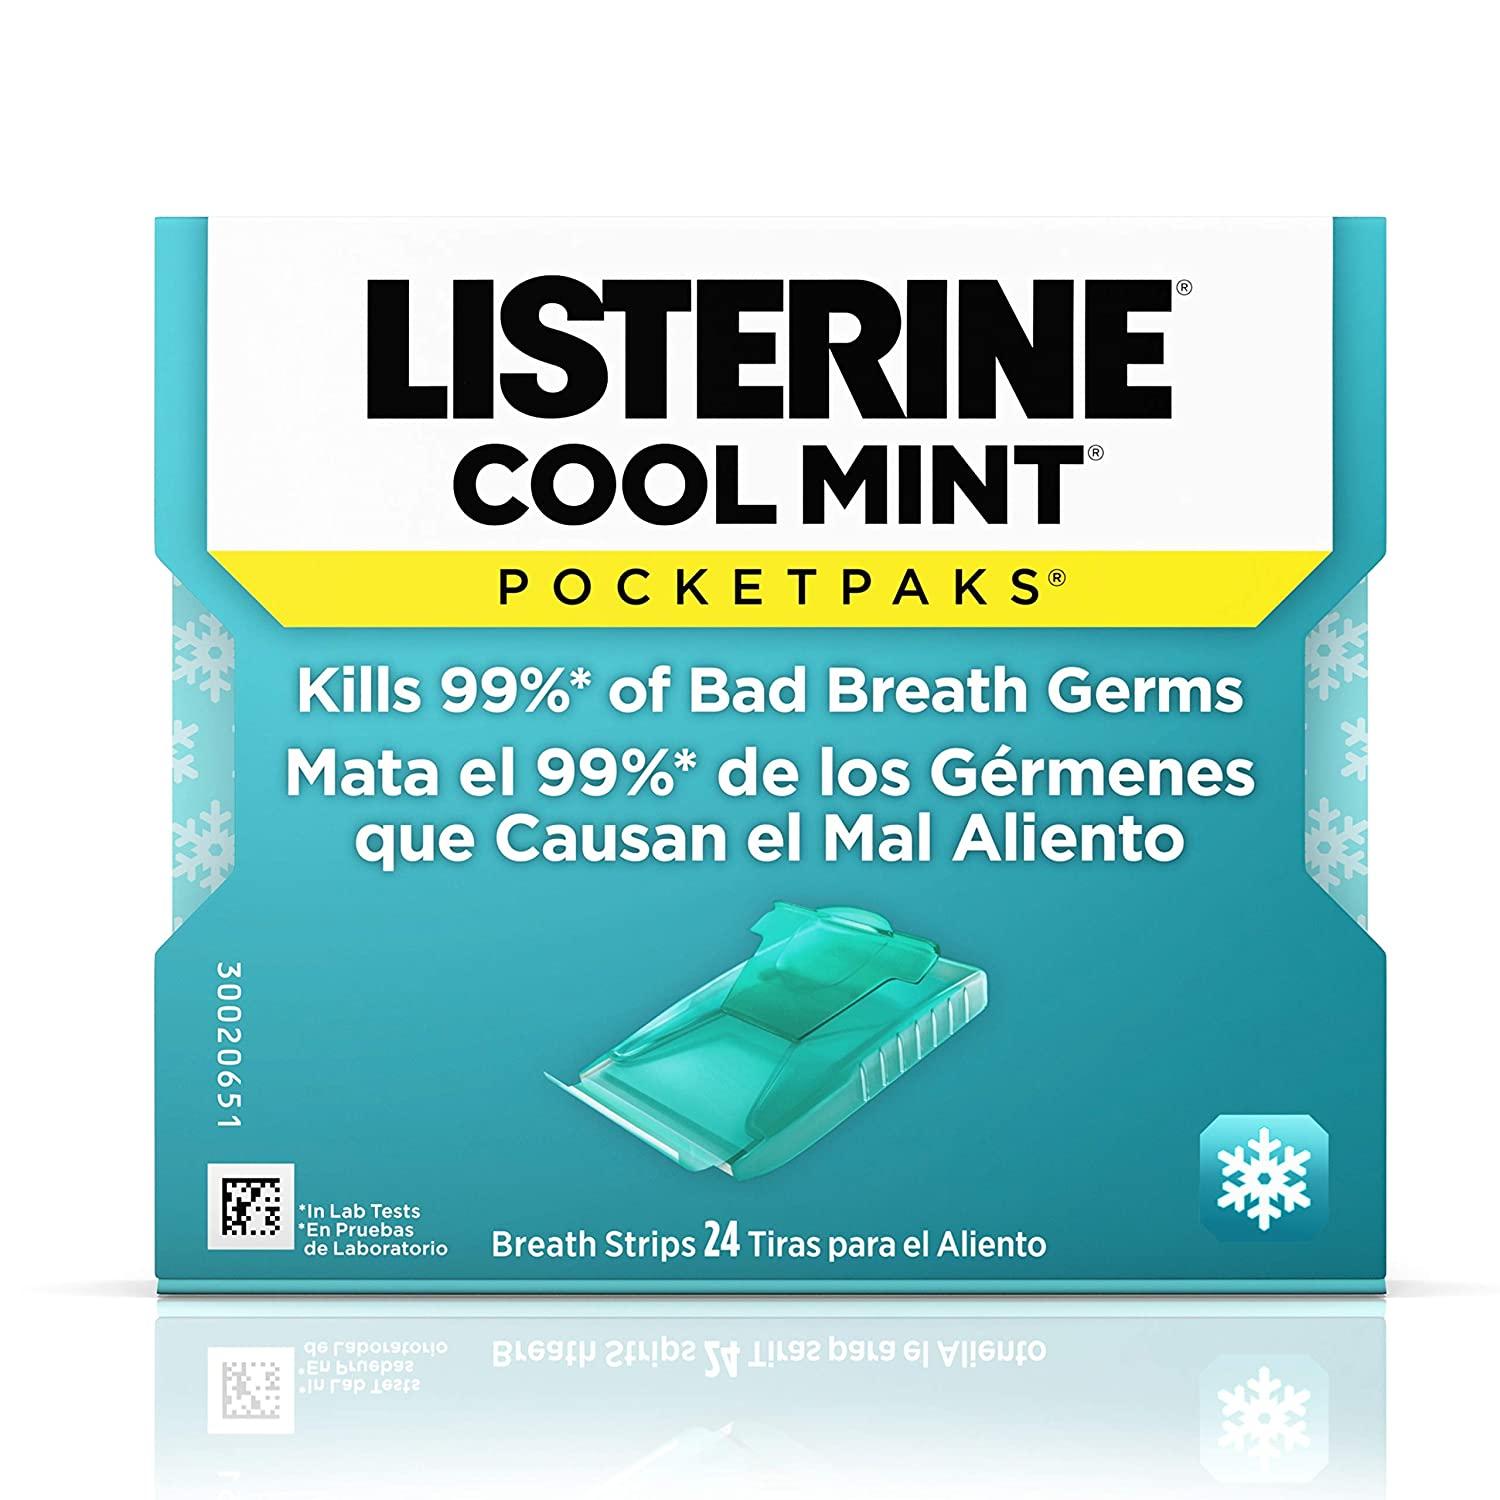 12 Listerine Cool Mint Pocketpaks Breath Strips for $7.97 Shipped